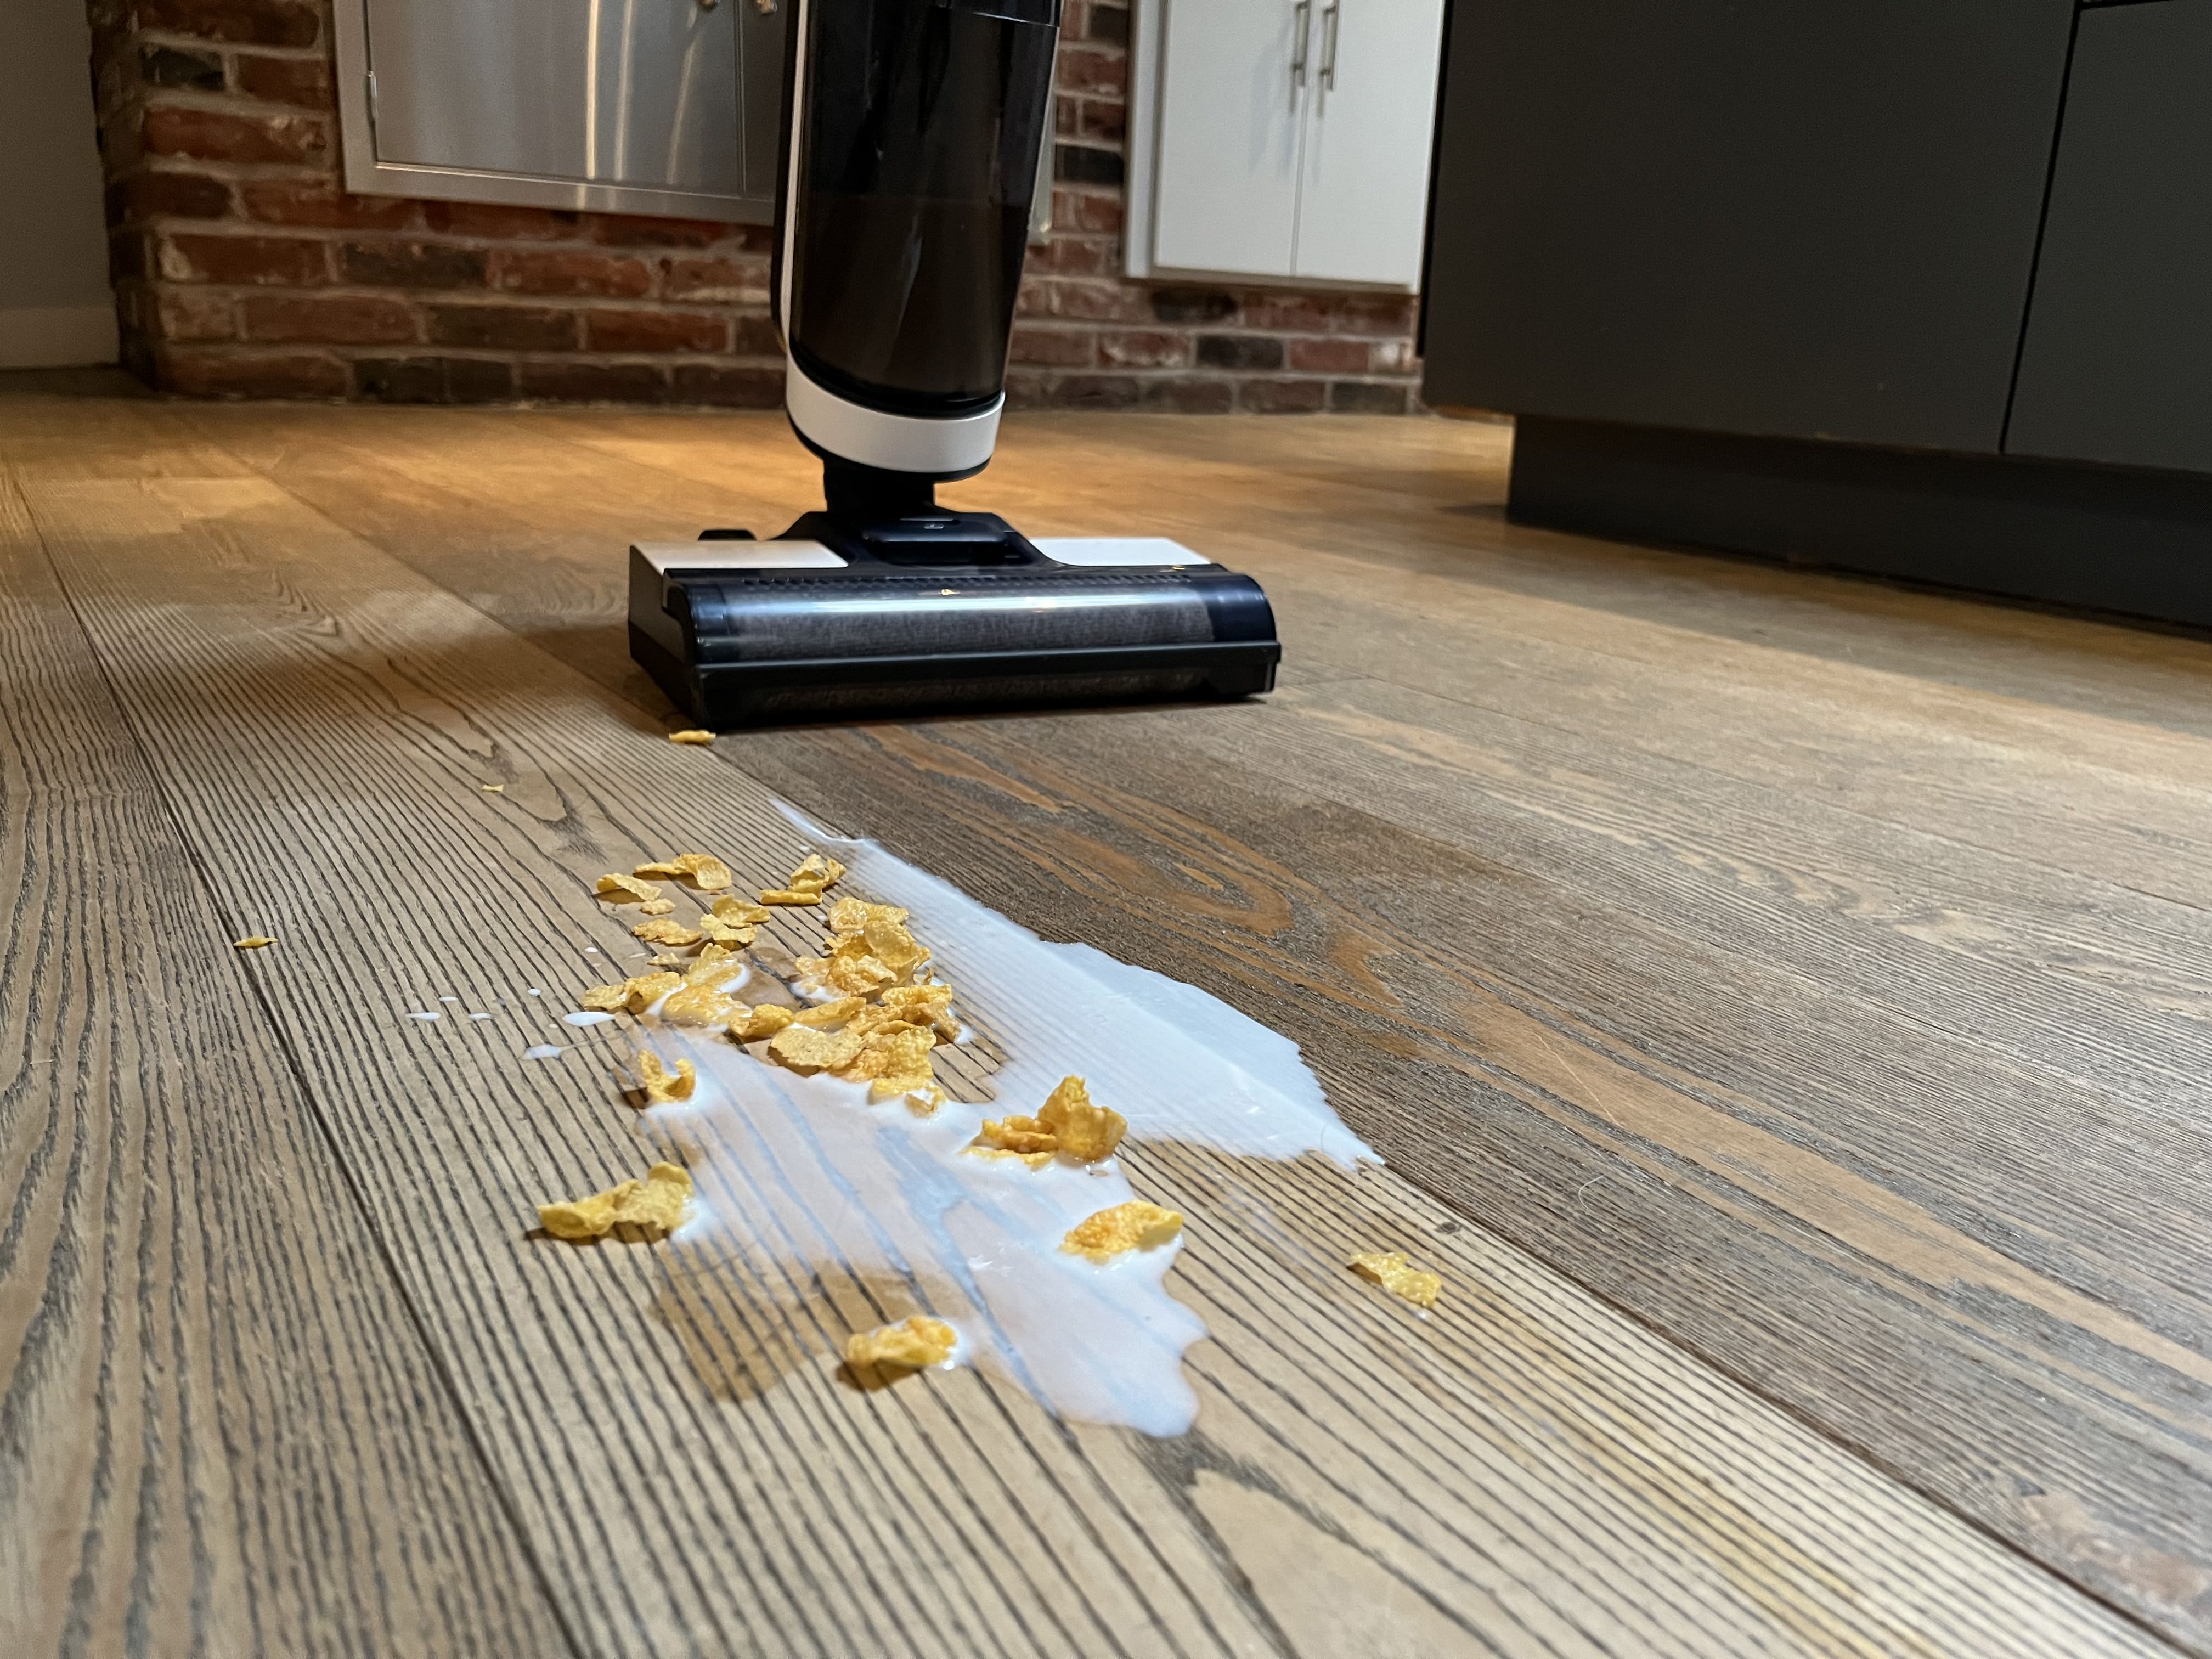 Tineco Floor One S3 review: washes, vacuums and cleans itself